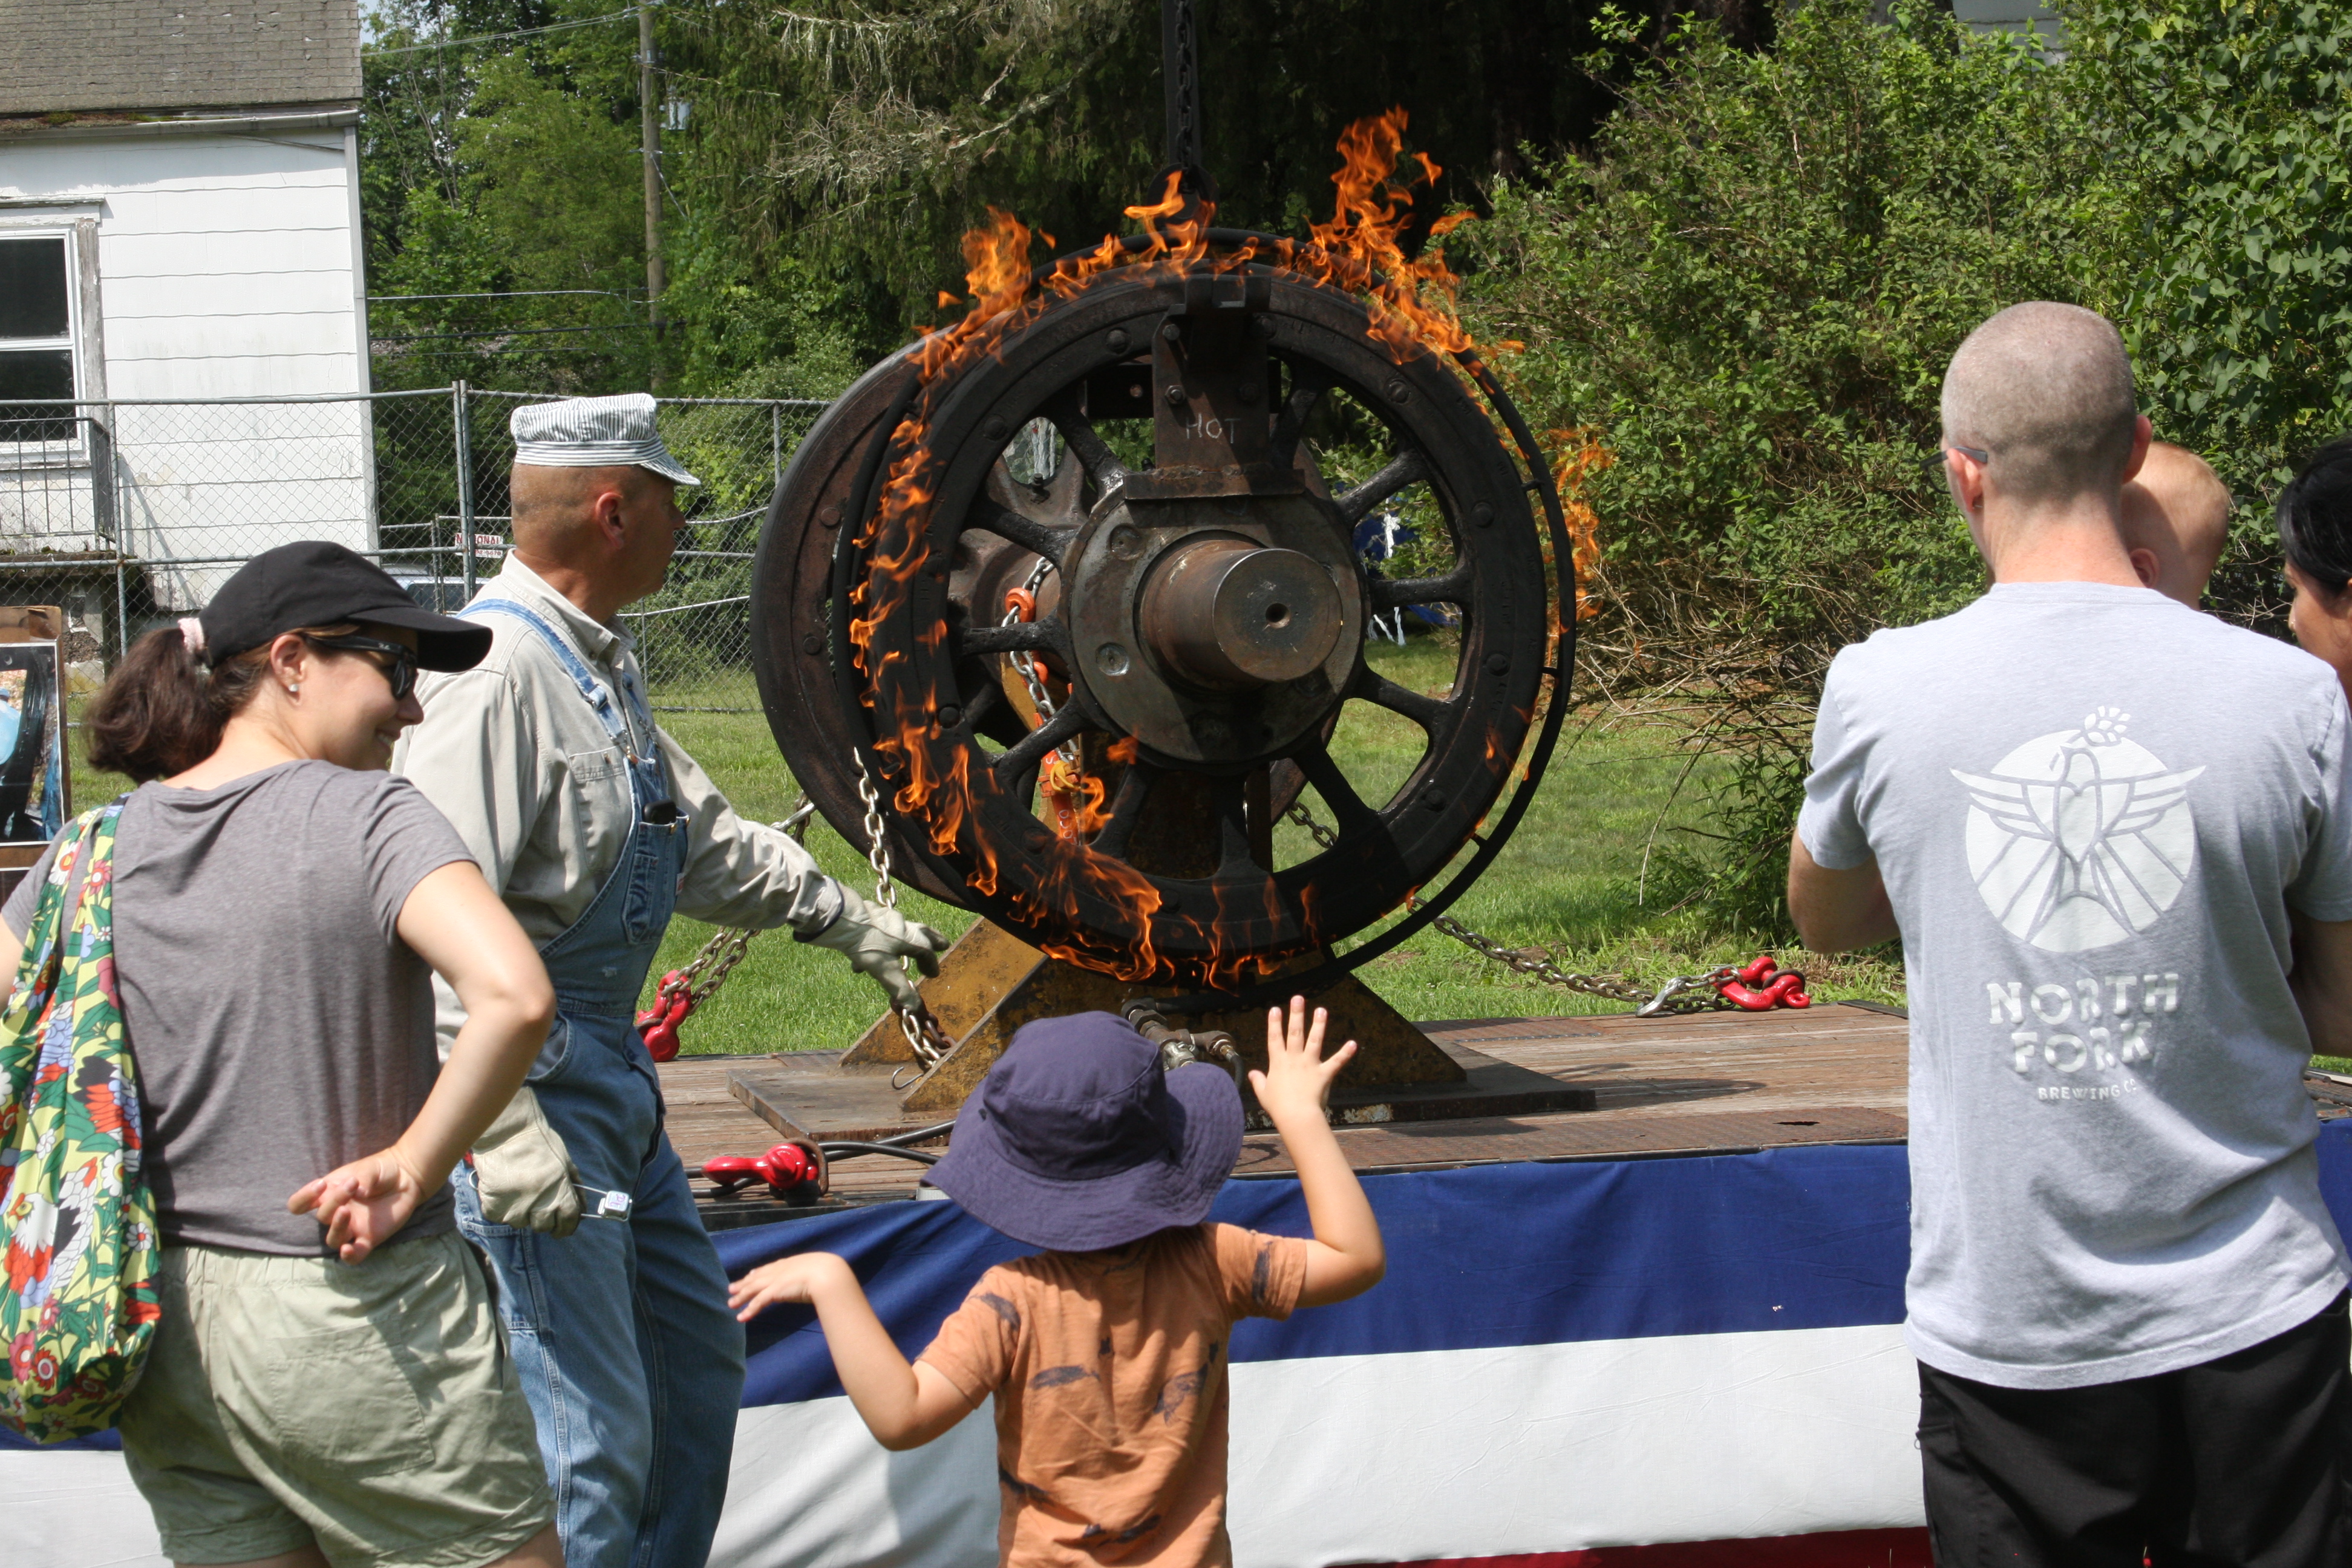 A family watch as man in train engineer clothes pulls on metal chain attached to large metal wheel. The wheel is one fire and mounted on a stand.